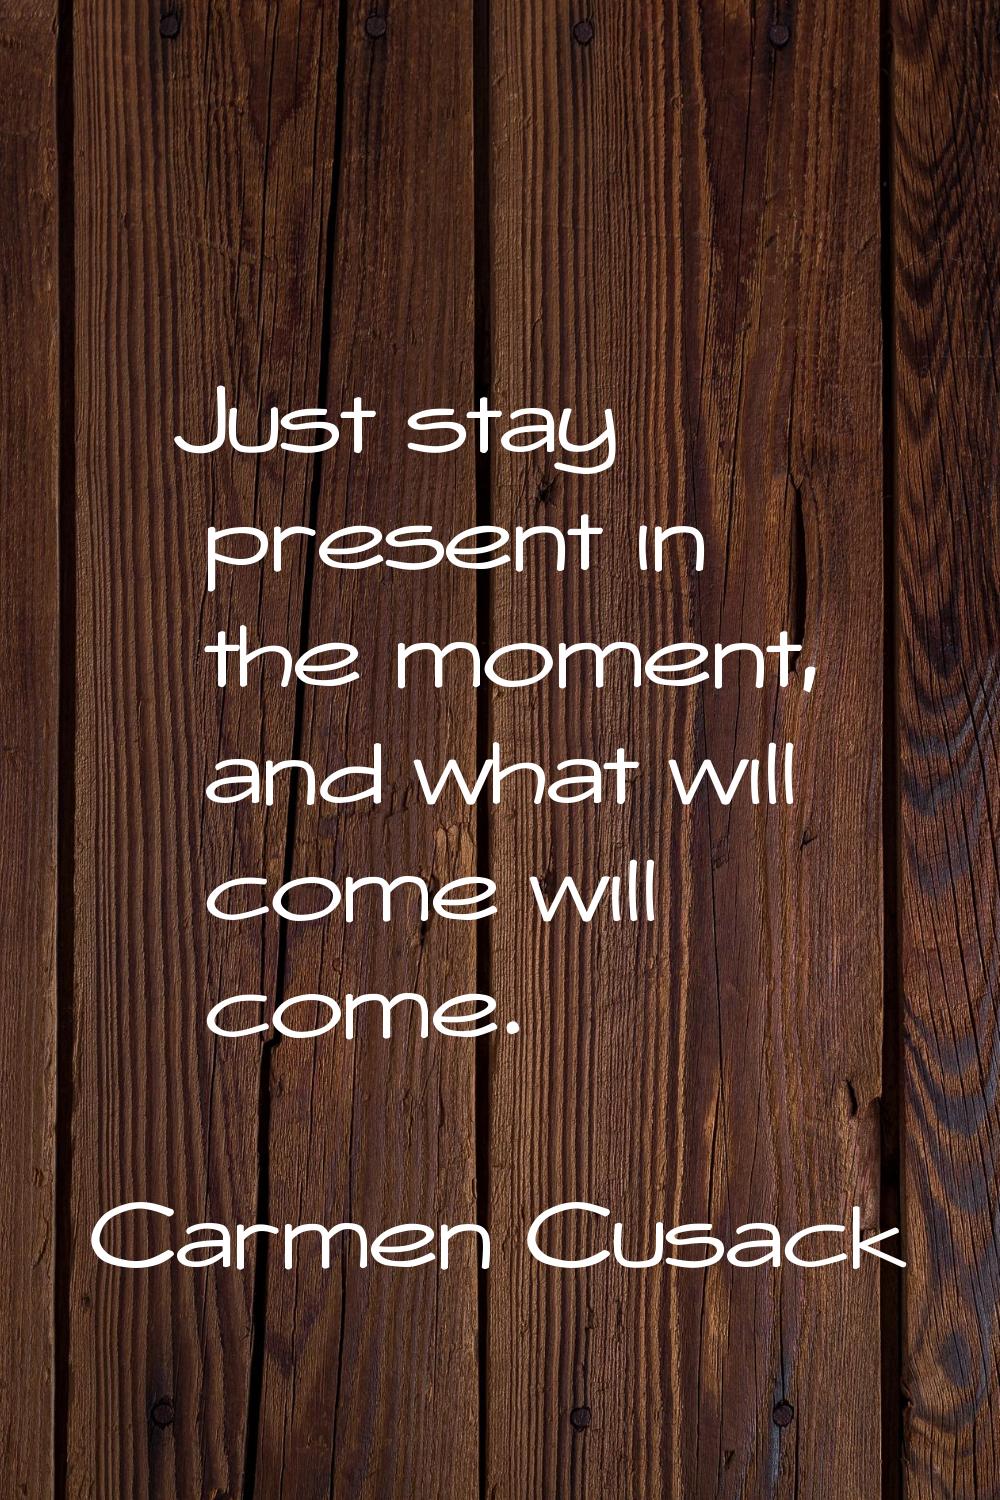 Just stay present in the moment, and what will come will come.